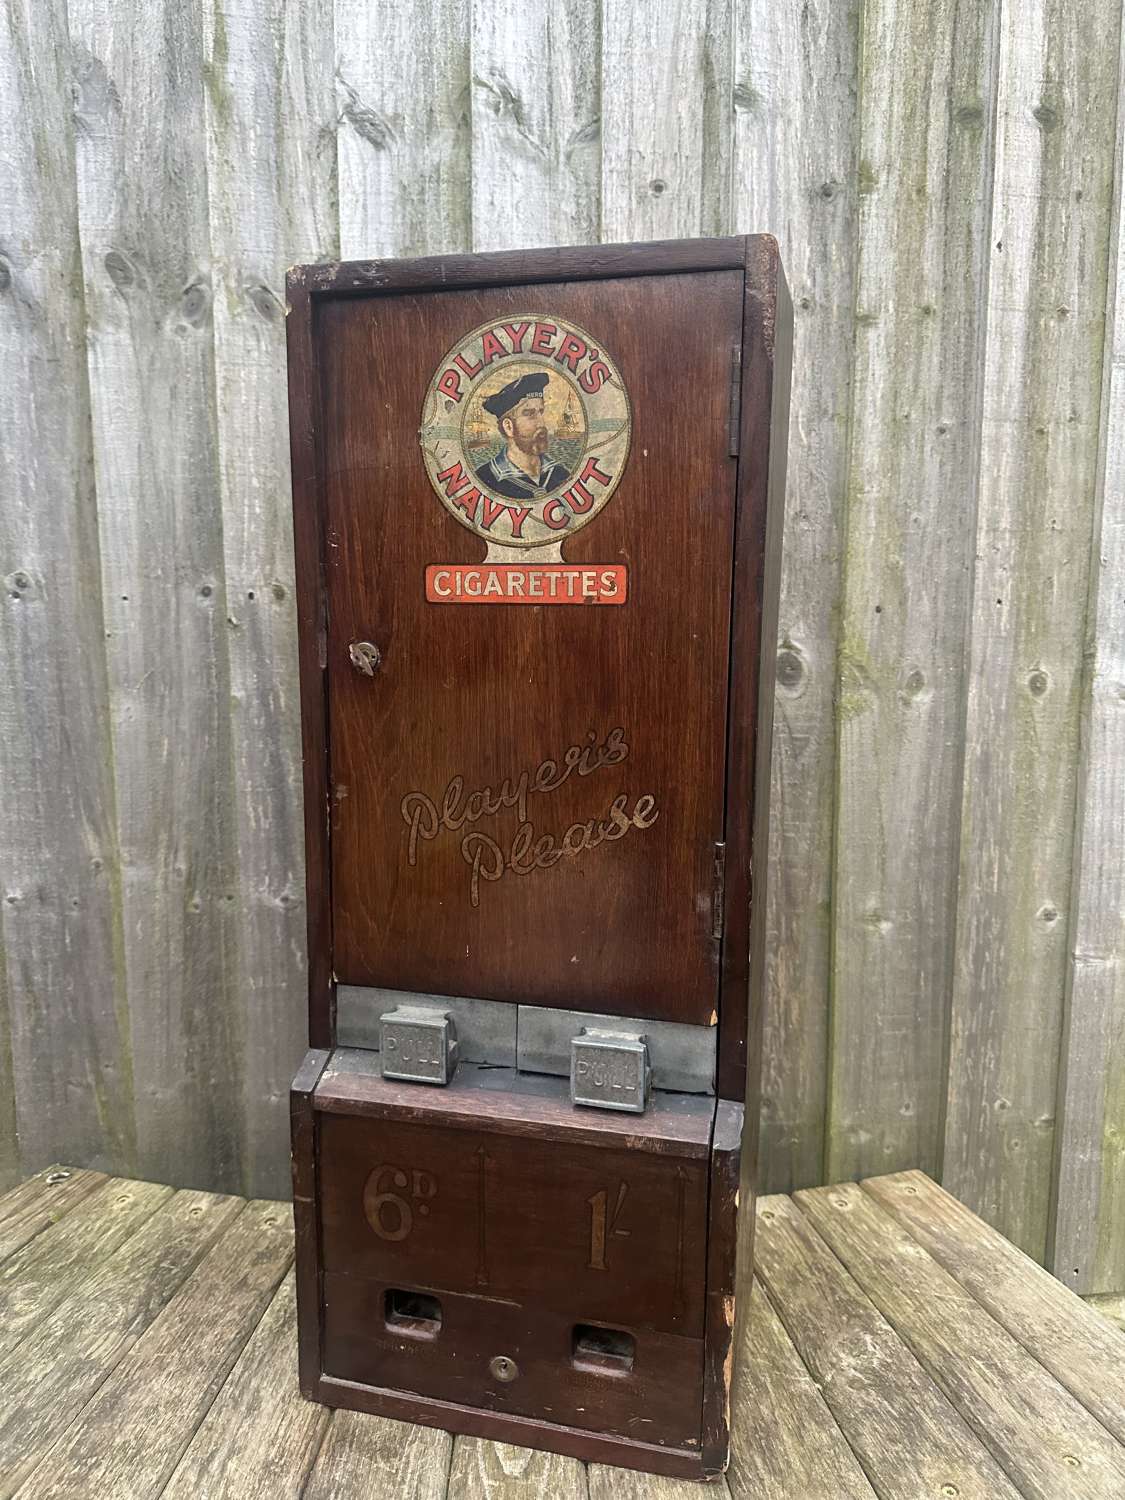 Players advertising wooden vending machine